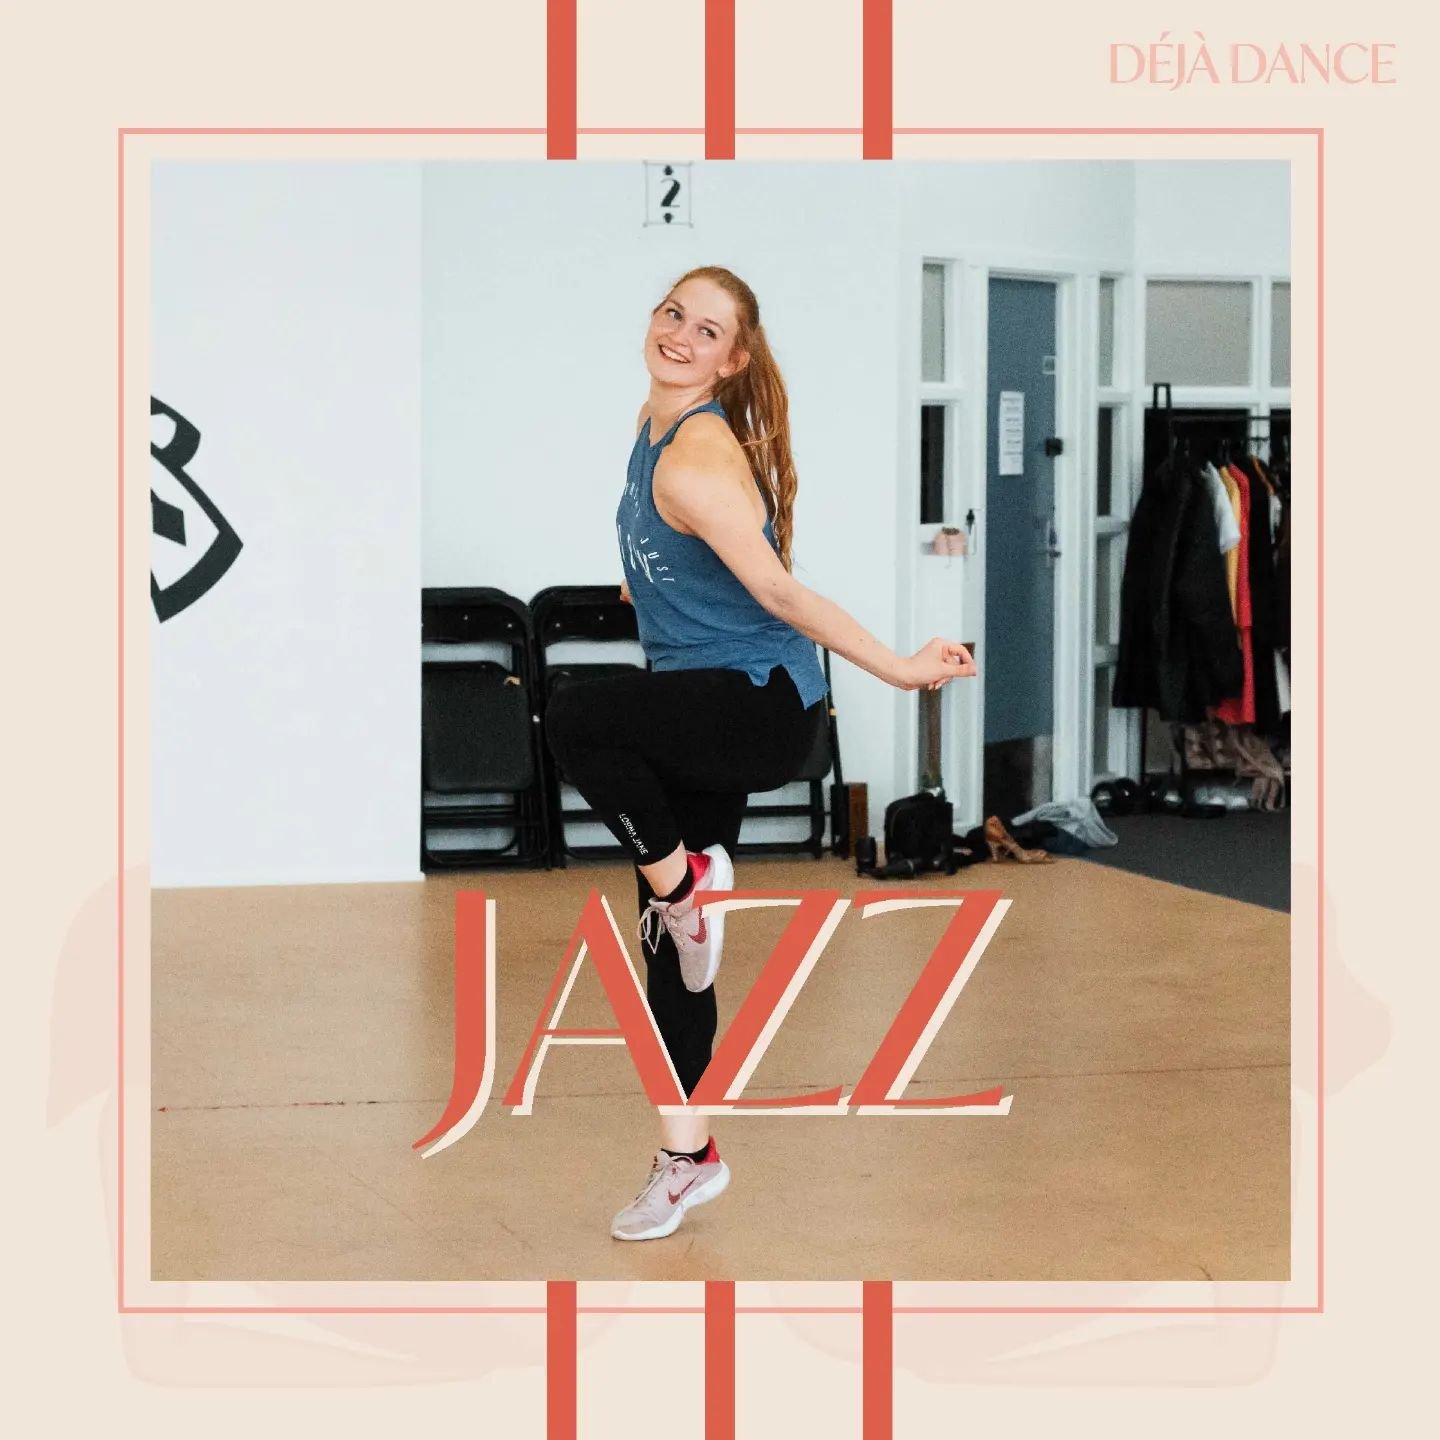 We're continuing our jazz routine to &quot;Dance the Night&quot; by Dua Lipa! (We've even got a little snippet from the actual Barbie movie choreo in there this week) 

A reminder that it's always brand new choreography every week, so any new friends